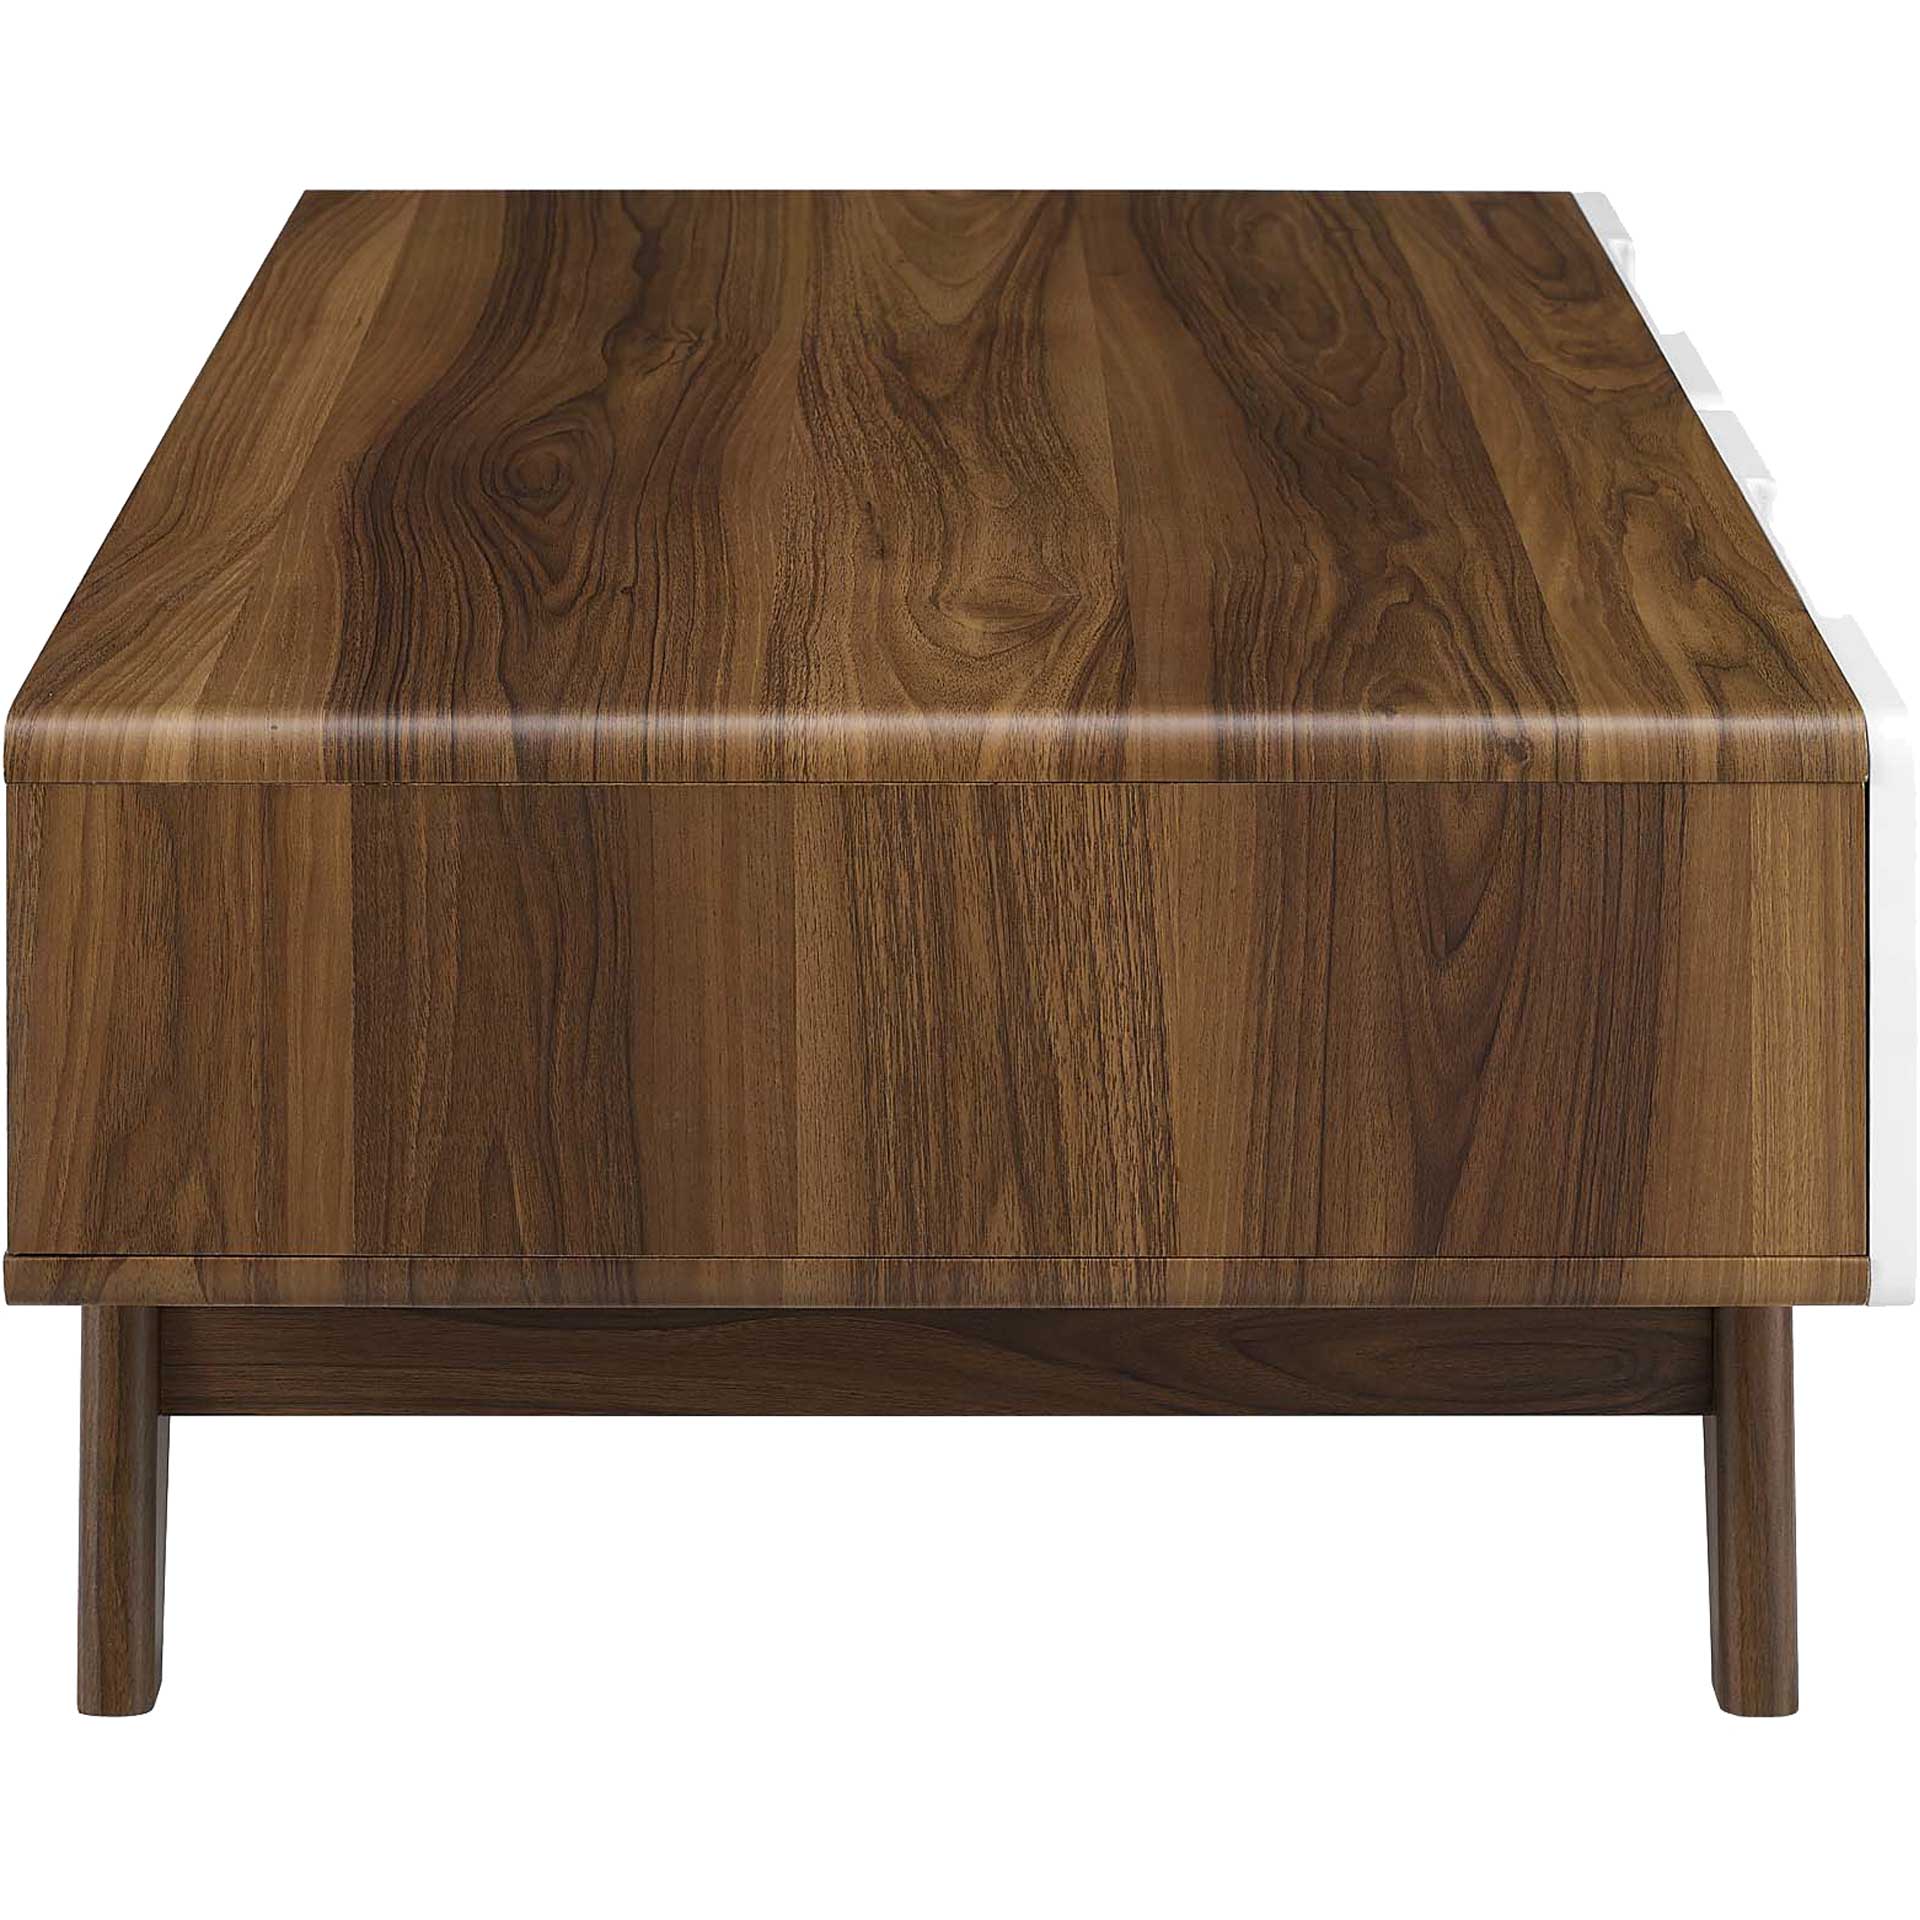 Orion Coffee Table Walnut/White